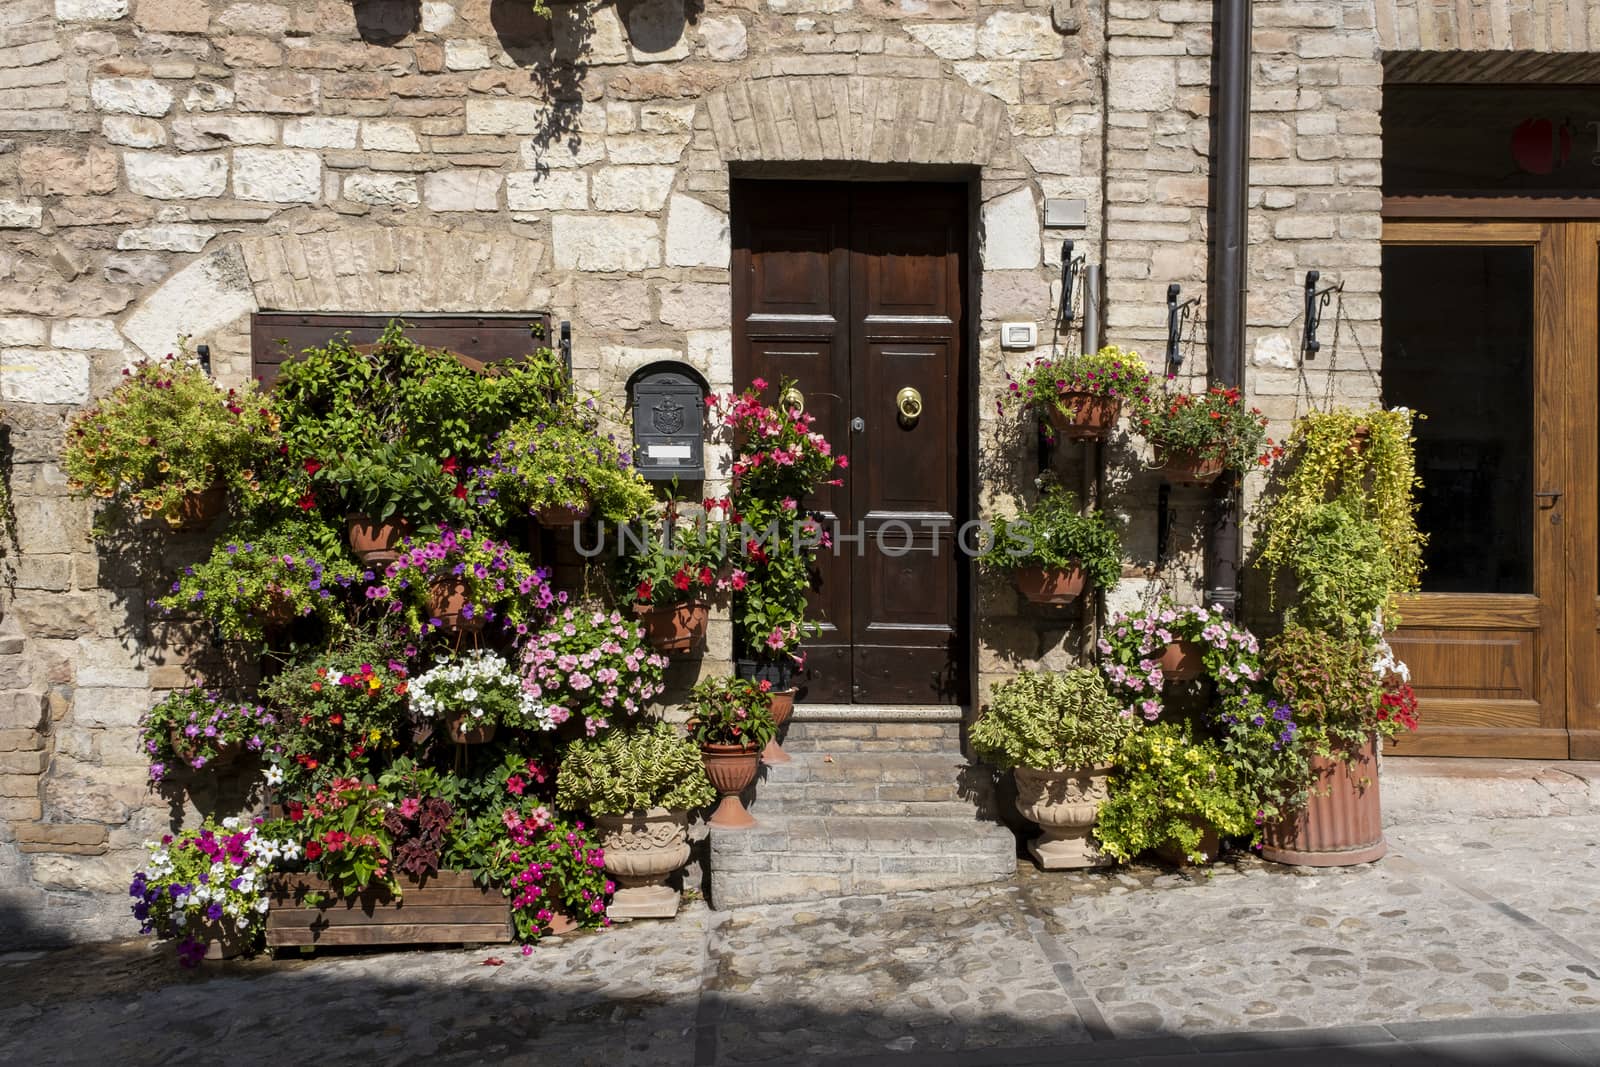 Colorful flowers outside a home in the Italian hill town of Assisi by Tjeerdkruse